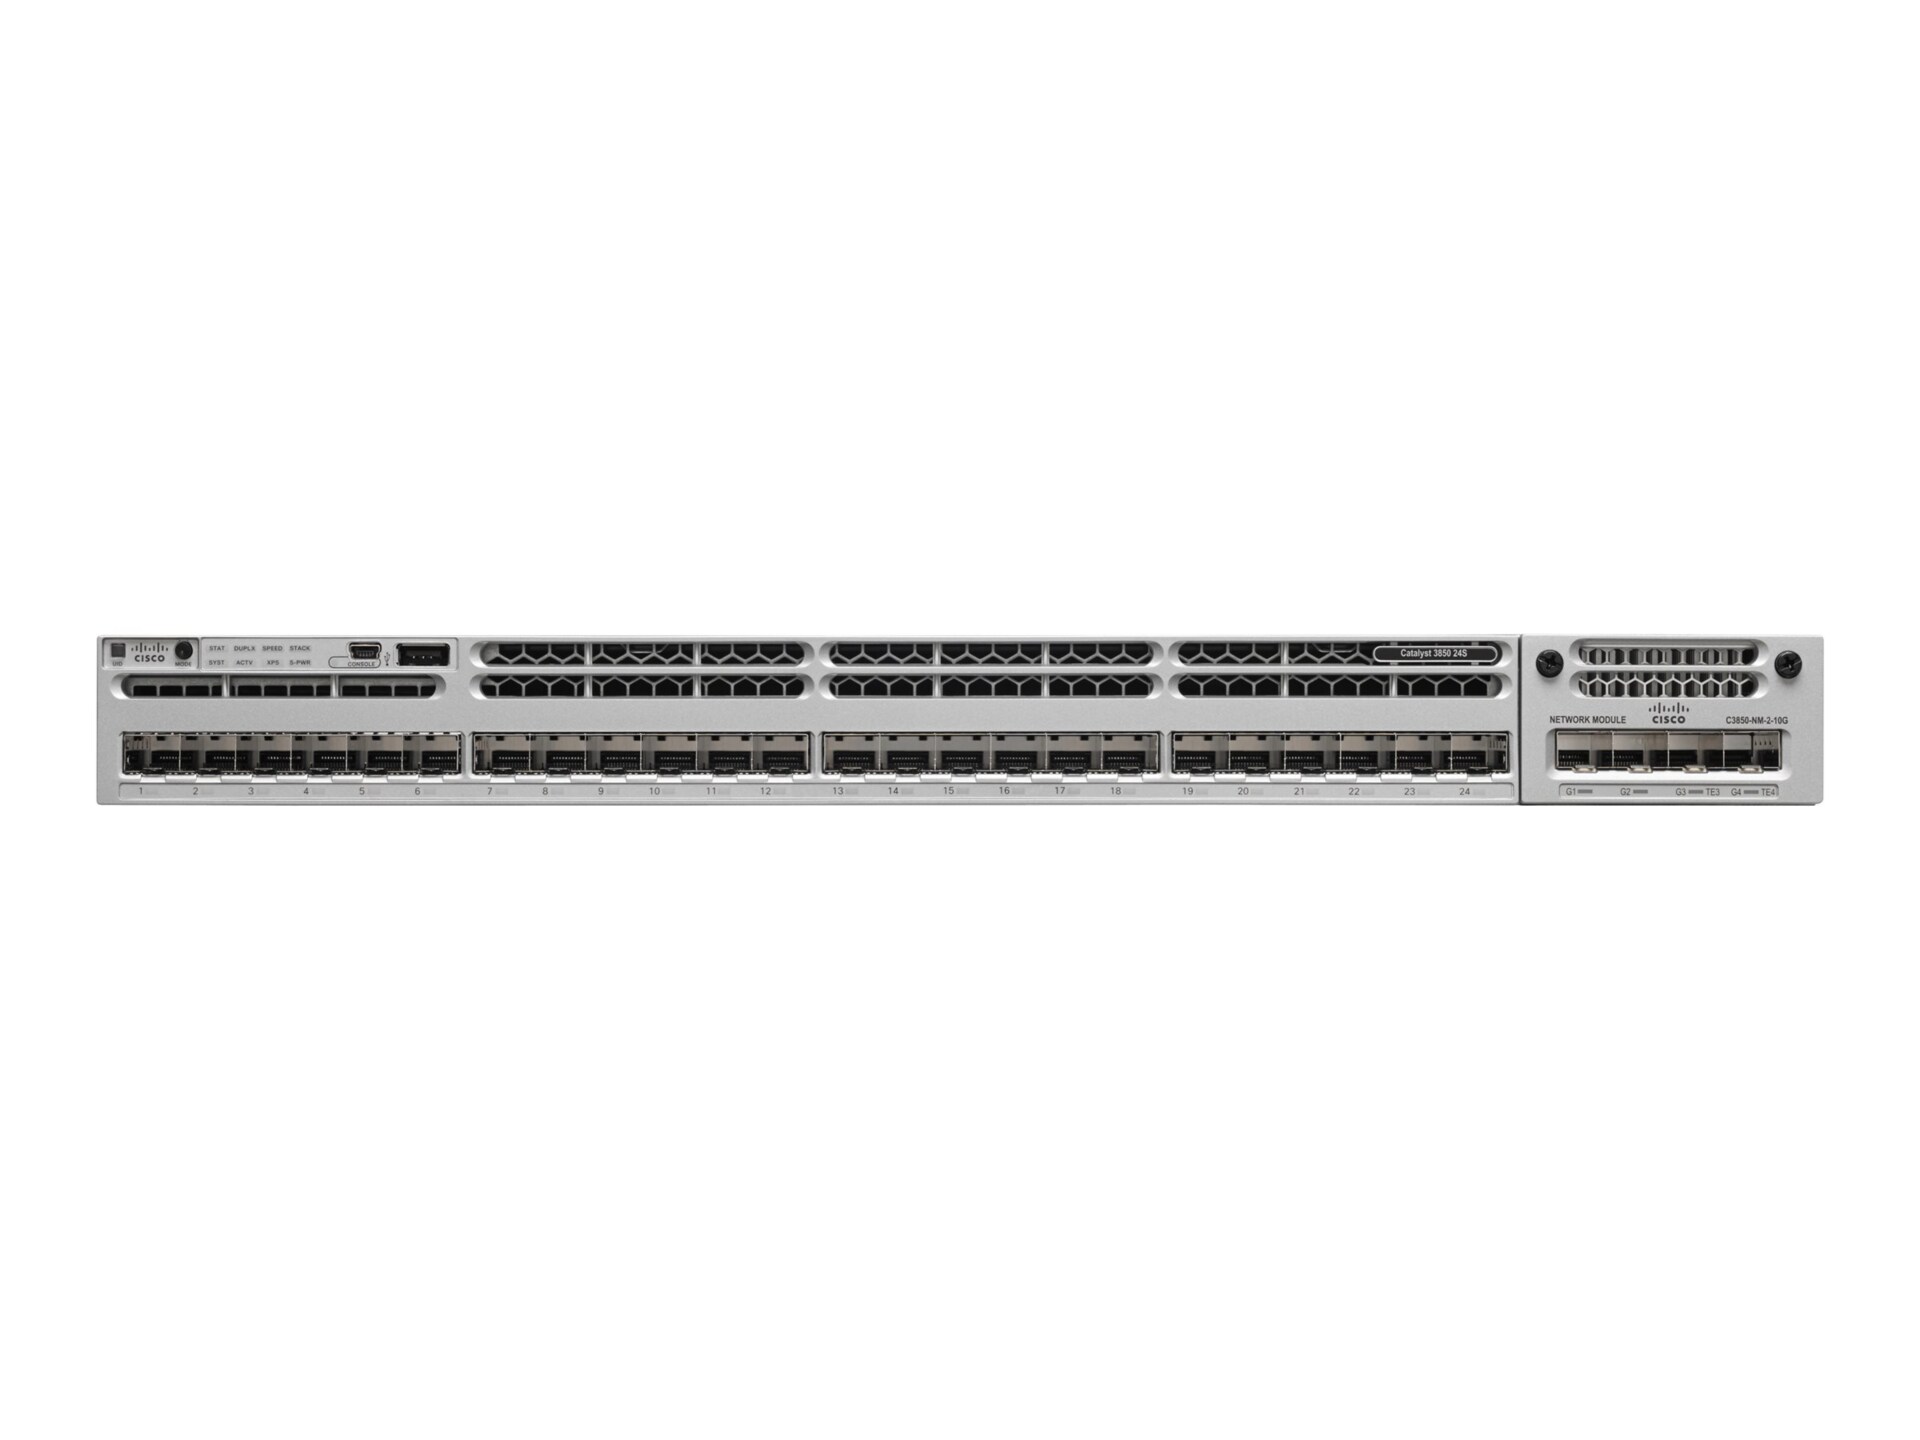 Cisco Catalyst 3850-24S-S - switch - 24 ports - managed - rack-mountable